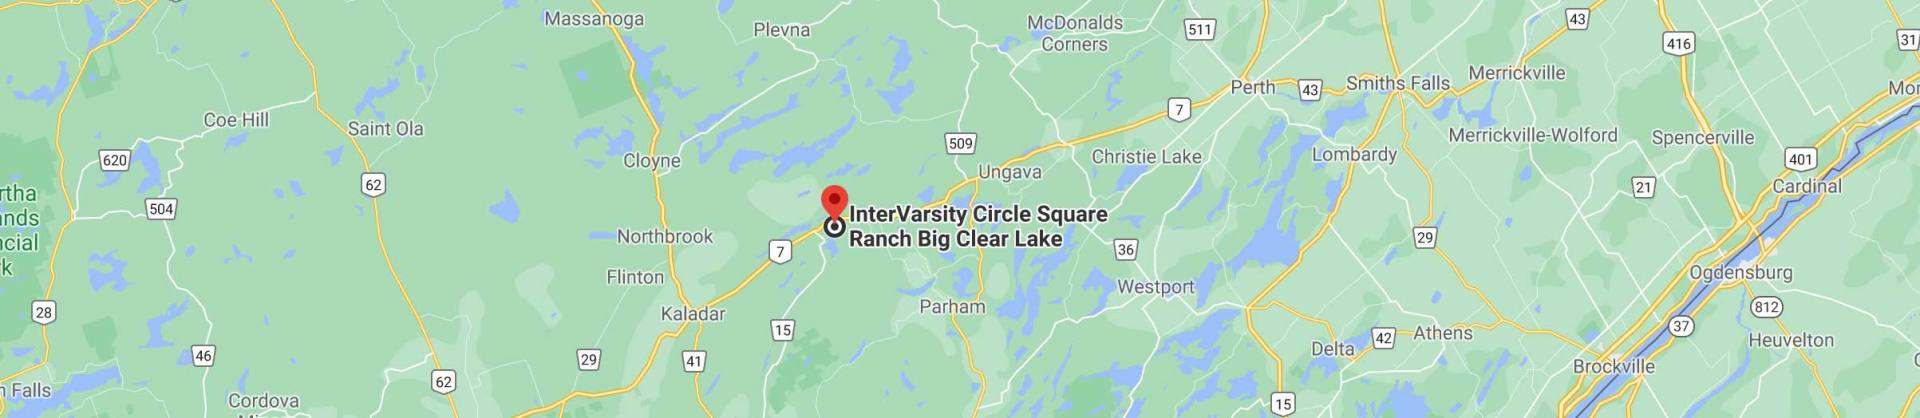 Circle Square Ranch Big Clear Lake's location indicated on a map. Links to Google maps directions.